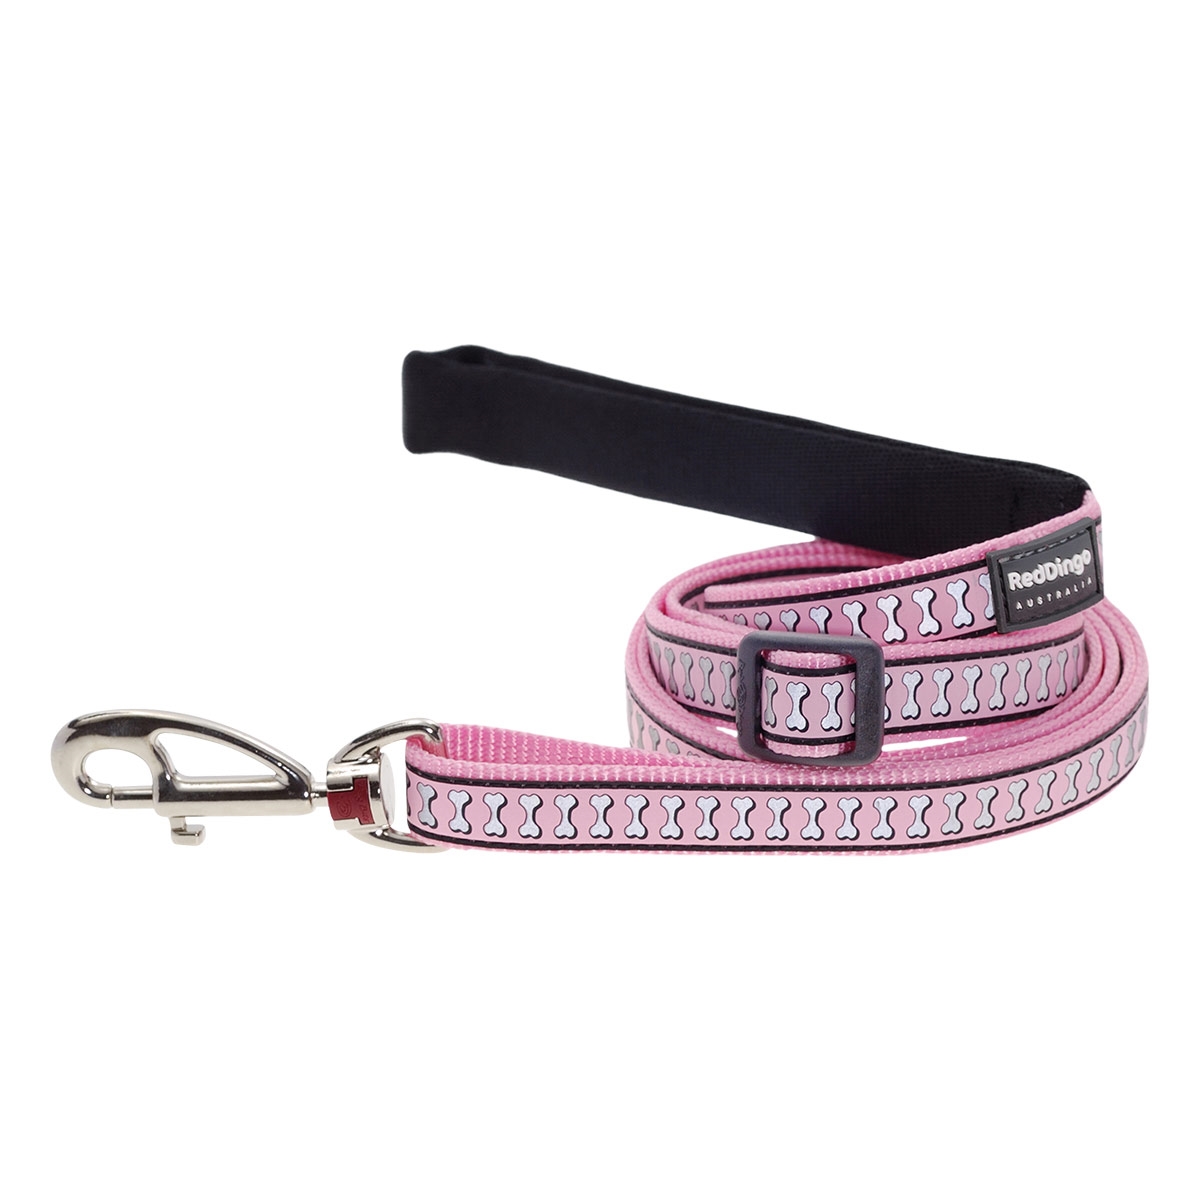 Picture of Red Dingo L6-RB-PK-15 Dog Lead Reflective Bones Pink - Small 6ft